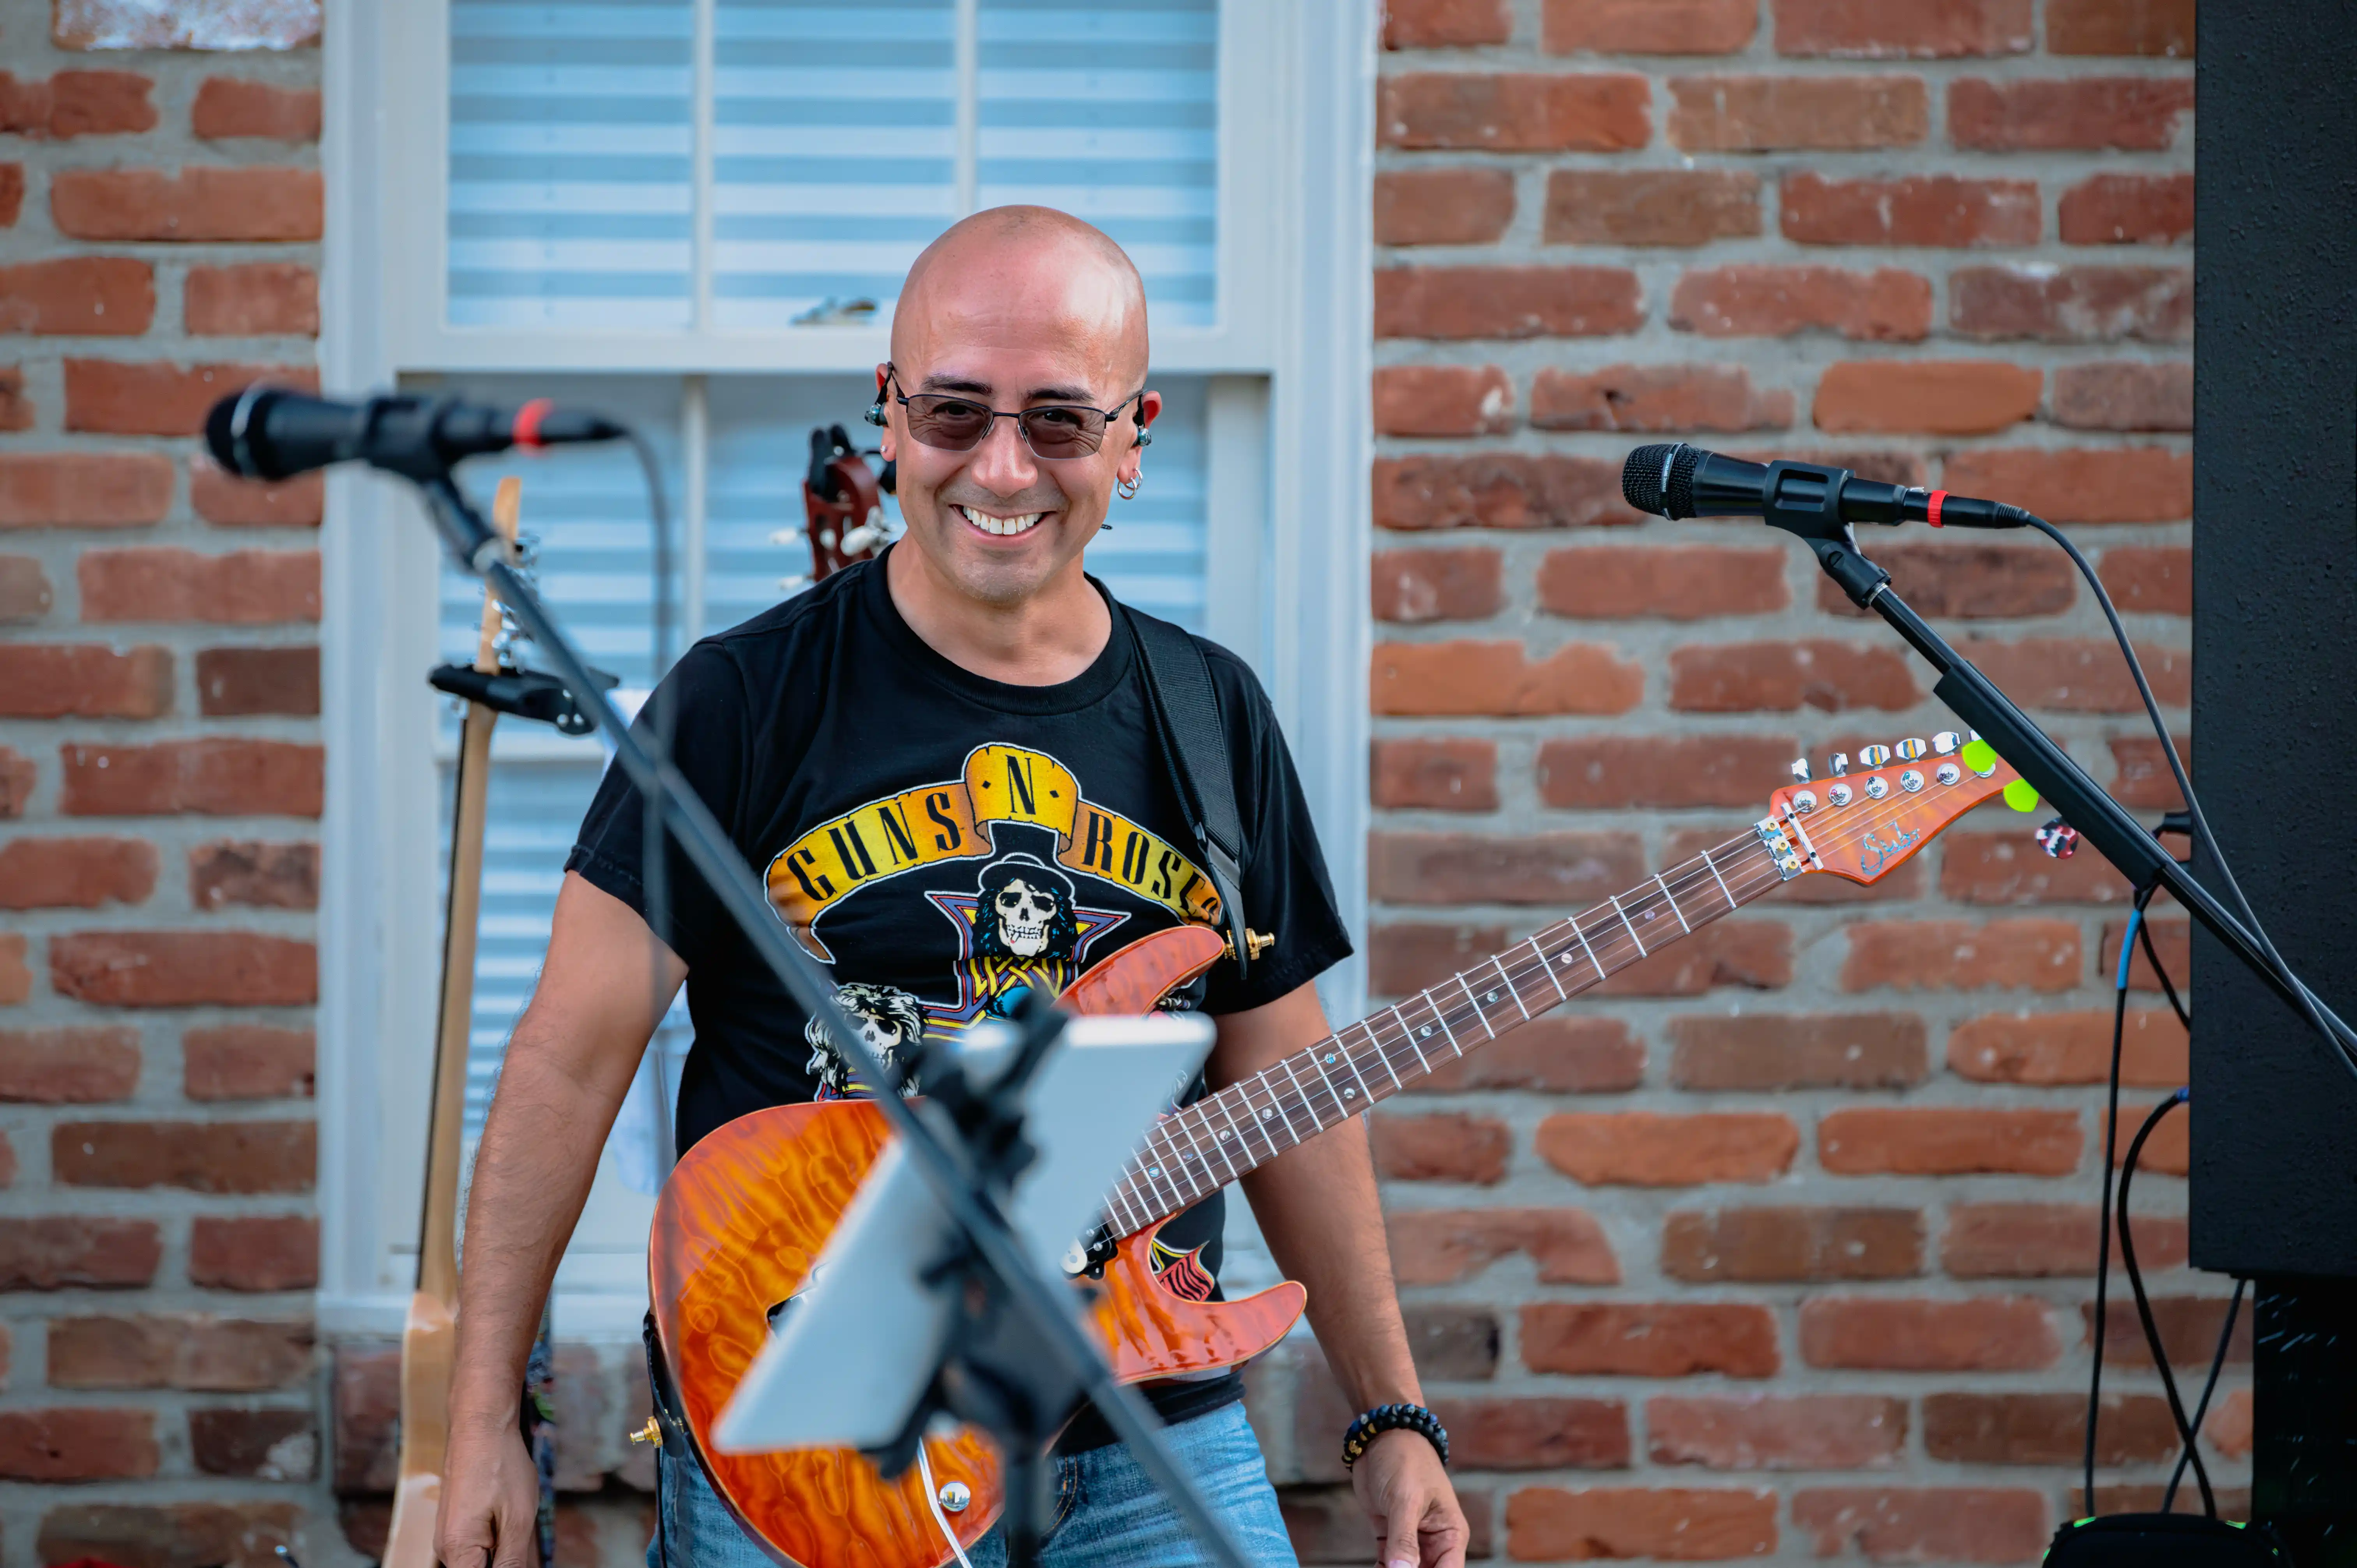 Smiling musician with sunglasses playing an orange electric guitar in front of a microphone and a brick wall background.